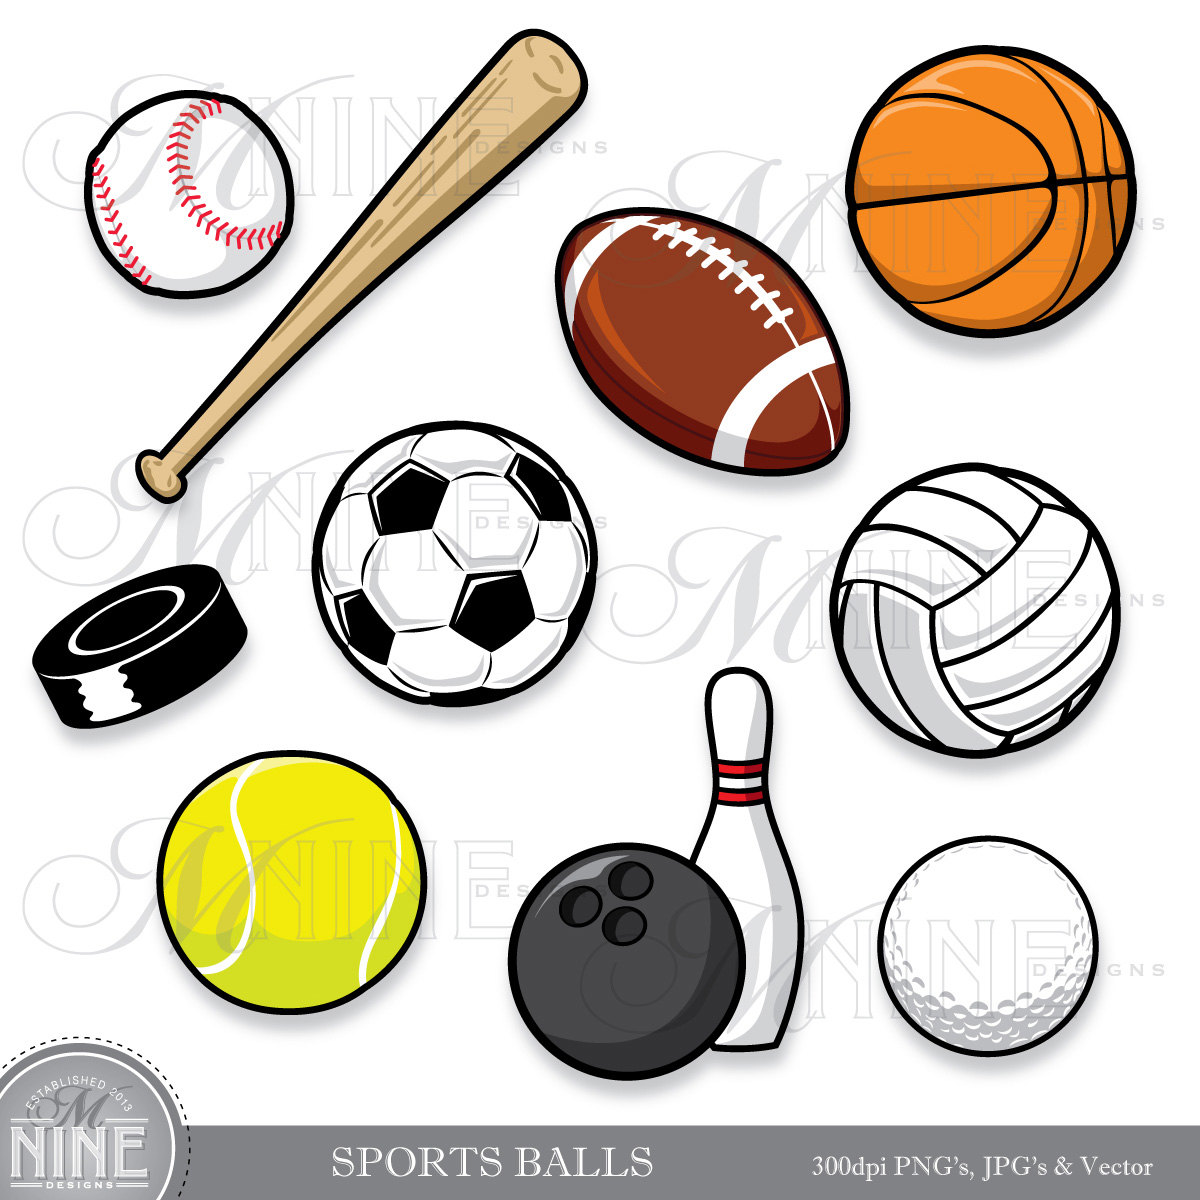 Sports free sport images clip